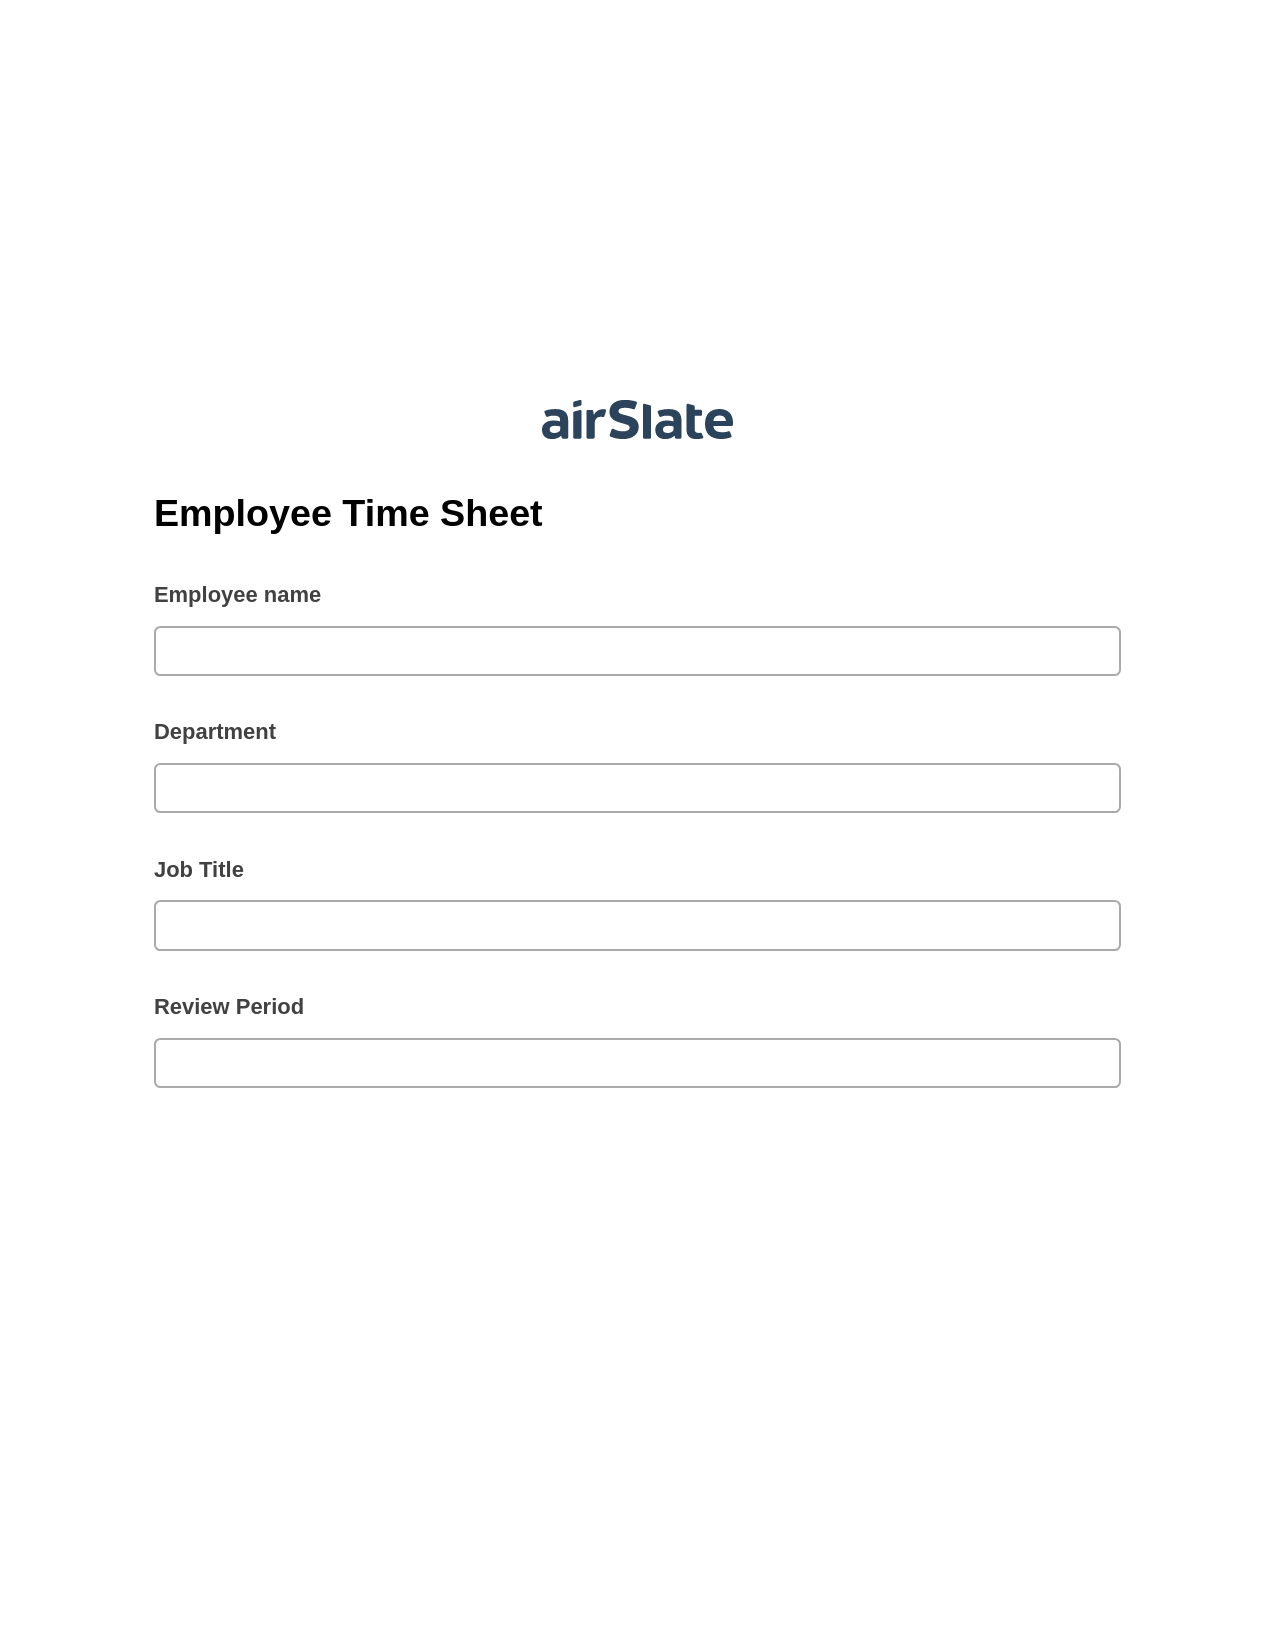 Multirole Employee Time Sheet Prefill from NetSuite records, Update Audit Trail Bot, Export to WebMerge Bot